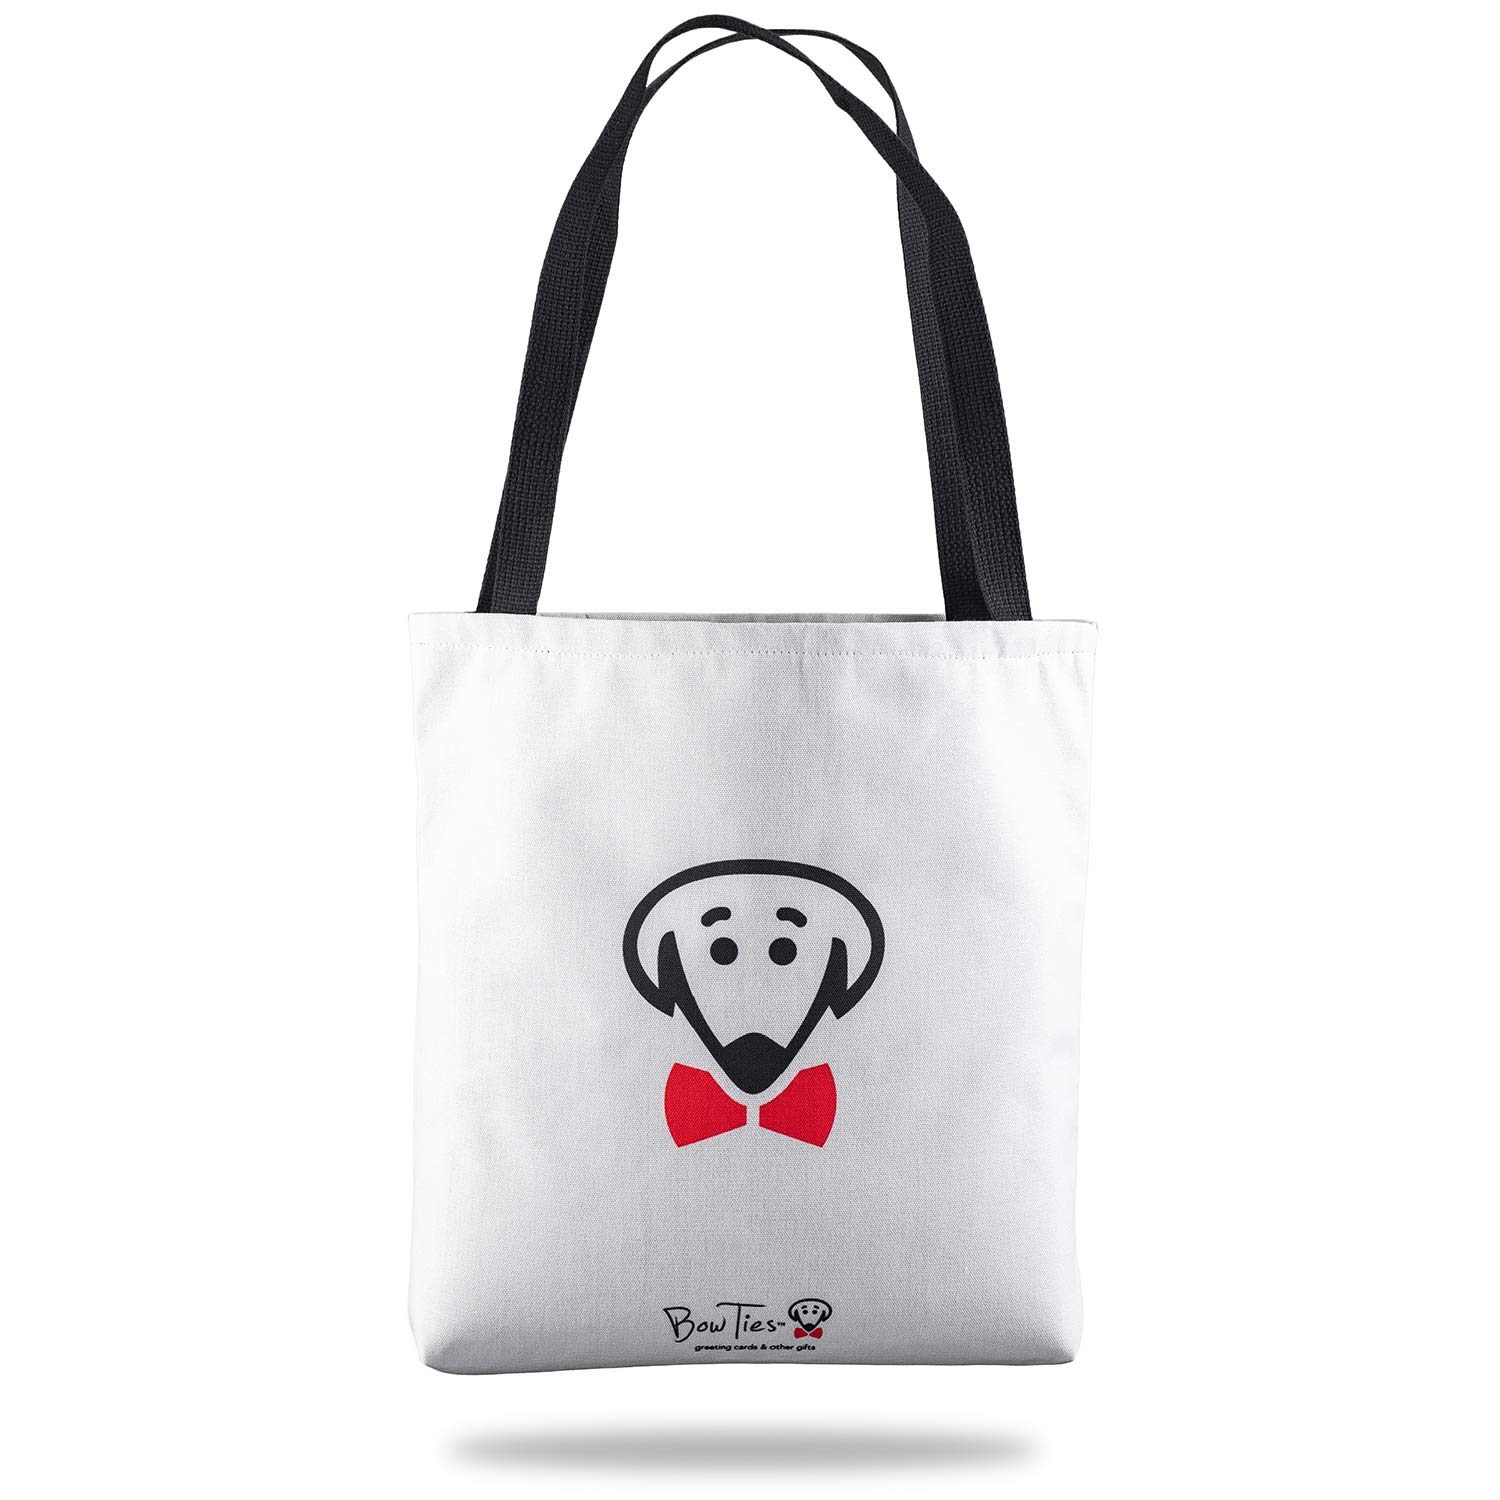 On the Run tote in white by Beau Tyler